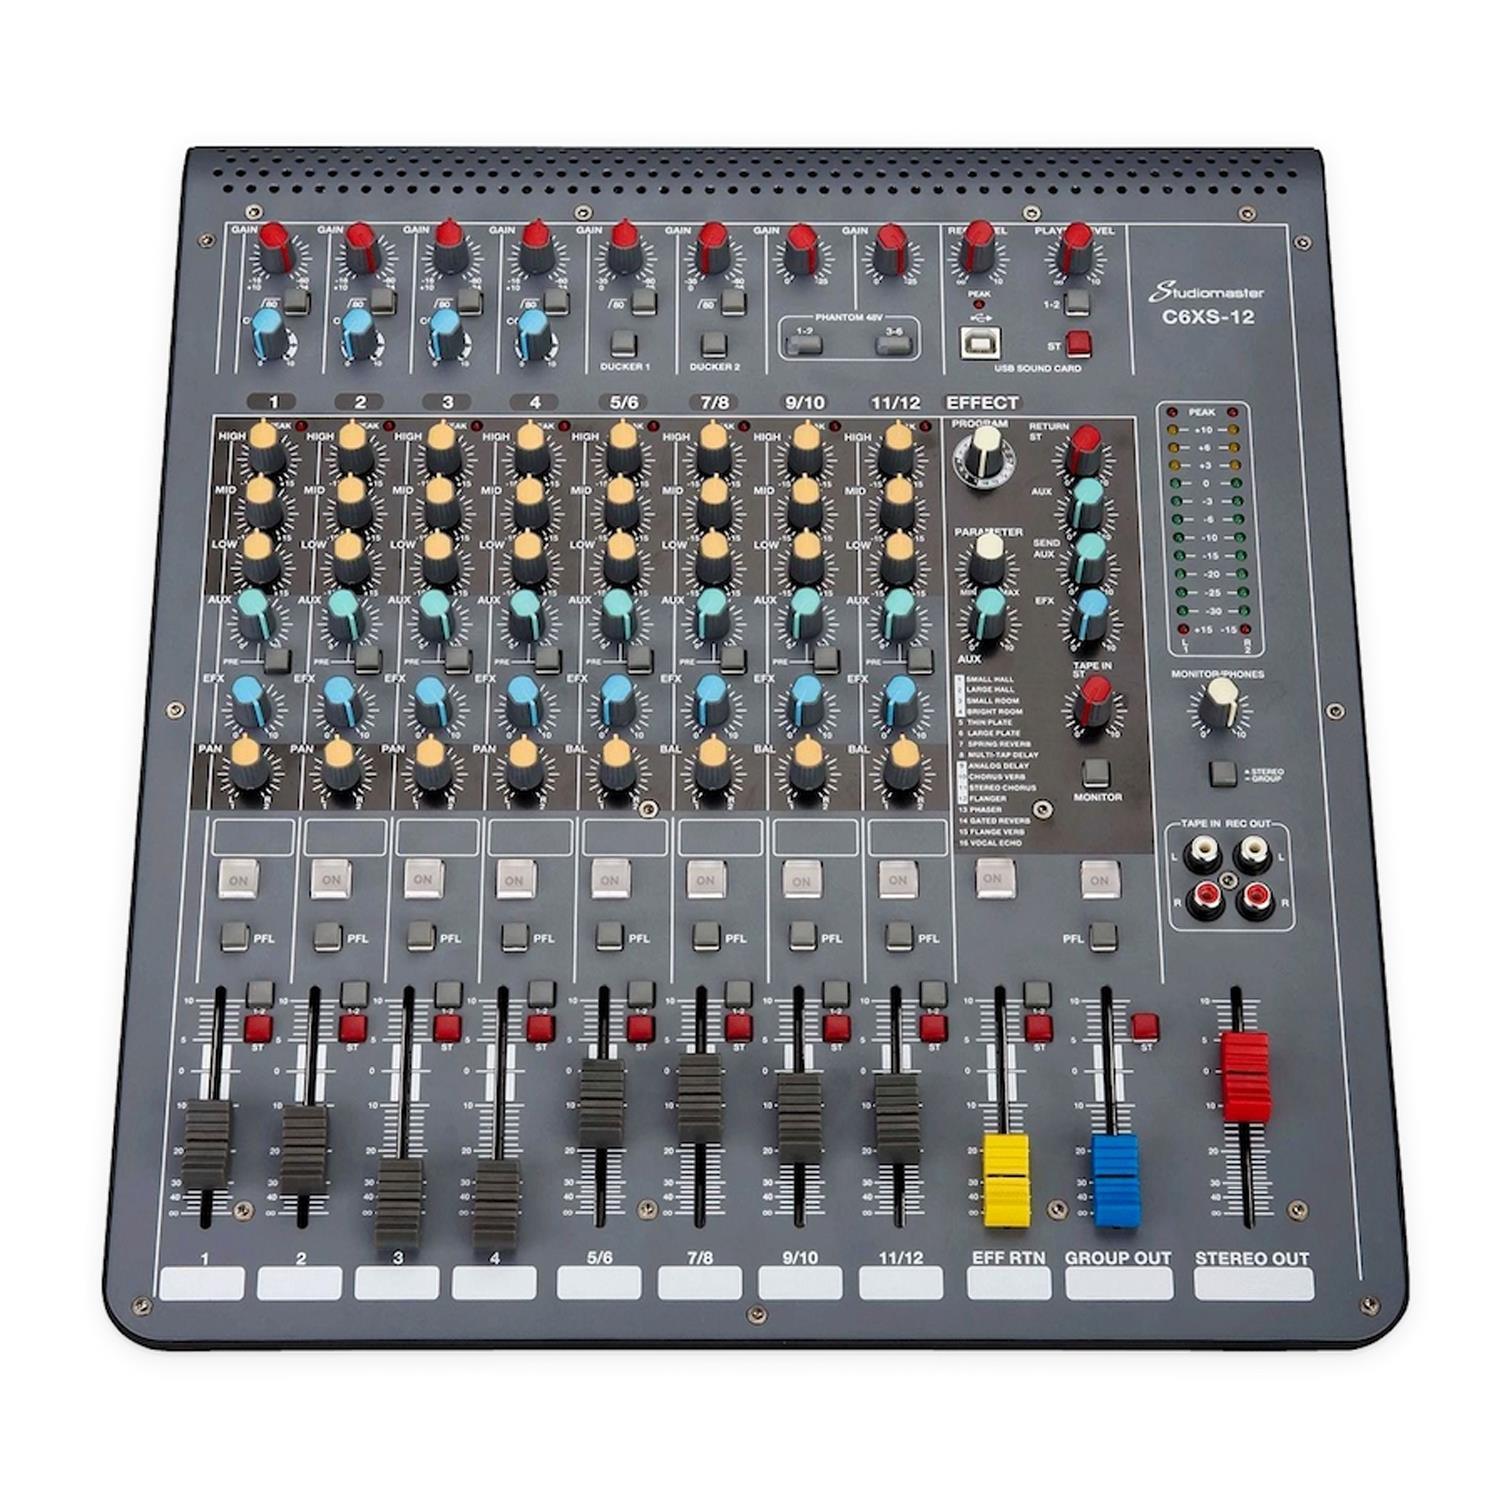 Studiomaster C6XS-12 12 Channel Compact Mixer - DY Pro Audio